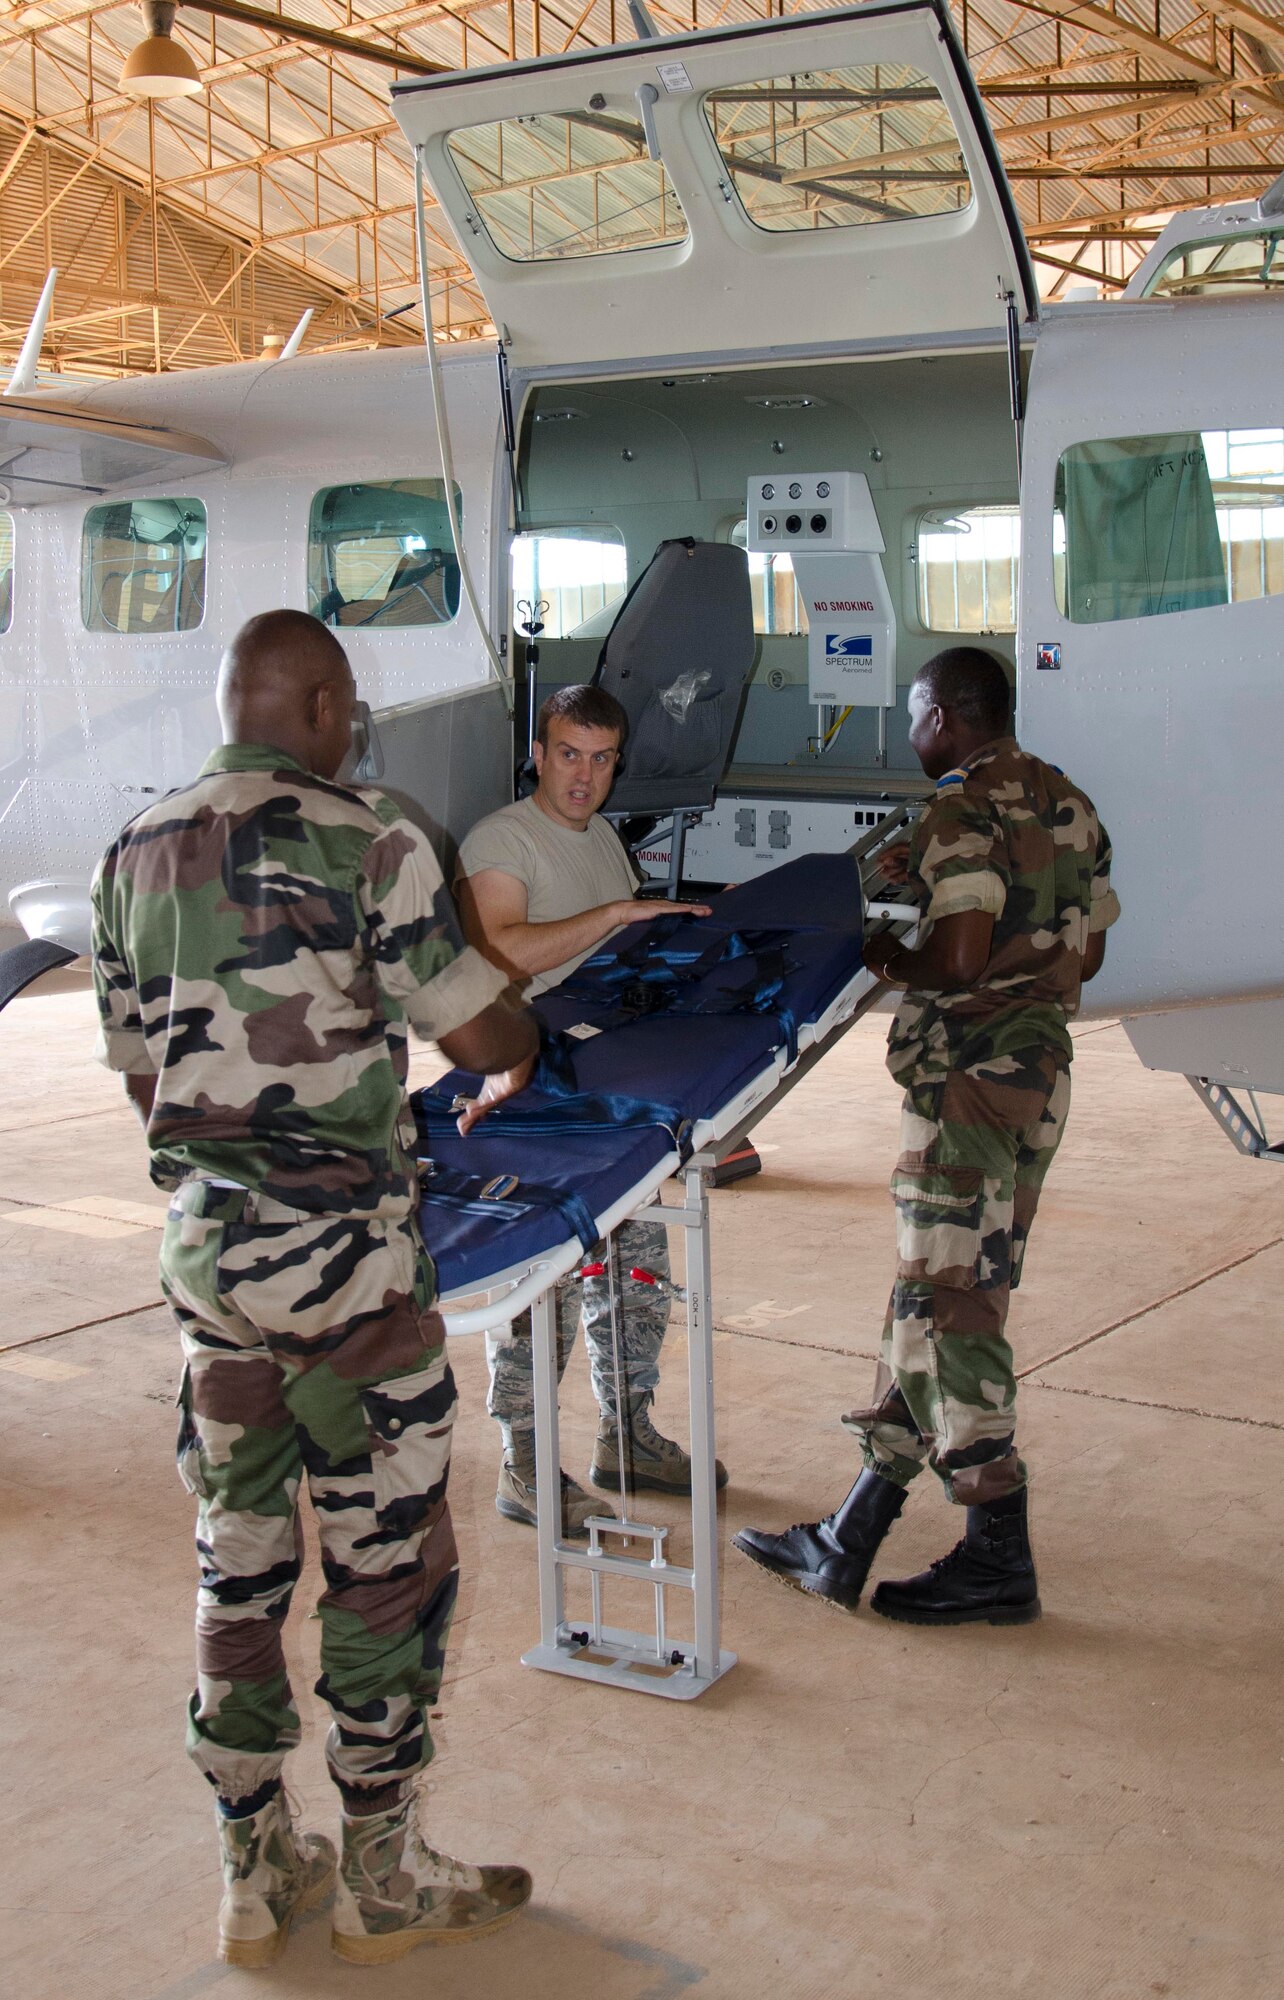 NIAMEY, Republic of Niger -- Maj. Michael Morrow, 818th Mobility Support Advisory Squadron air advisor, conducts aeromedical evacuation training with Niger National Flight Airmen at Airbase 101, Niamey, Niger, Nov. 7, 2013. The 818 MSAS sent a seven Airmen logistics management assistance team to provide a complete air mobility/logistics expertise package that was tailored to fit the needs of the partner nation, with a focus on hands-on training. (U.S. Air Force photo by Maj. Sean Hook)